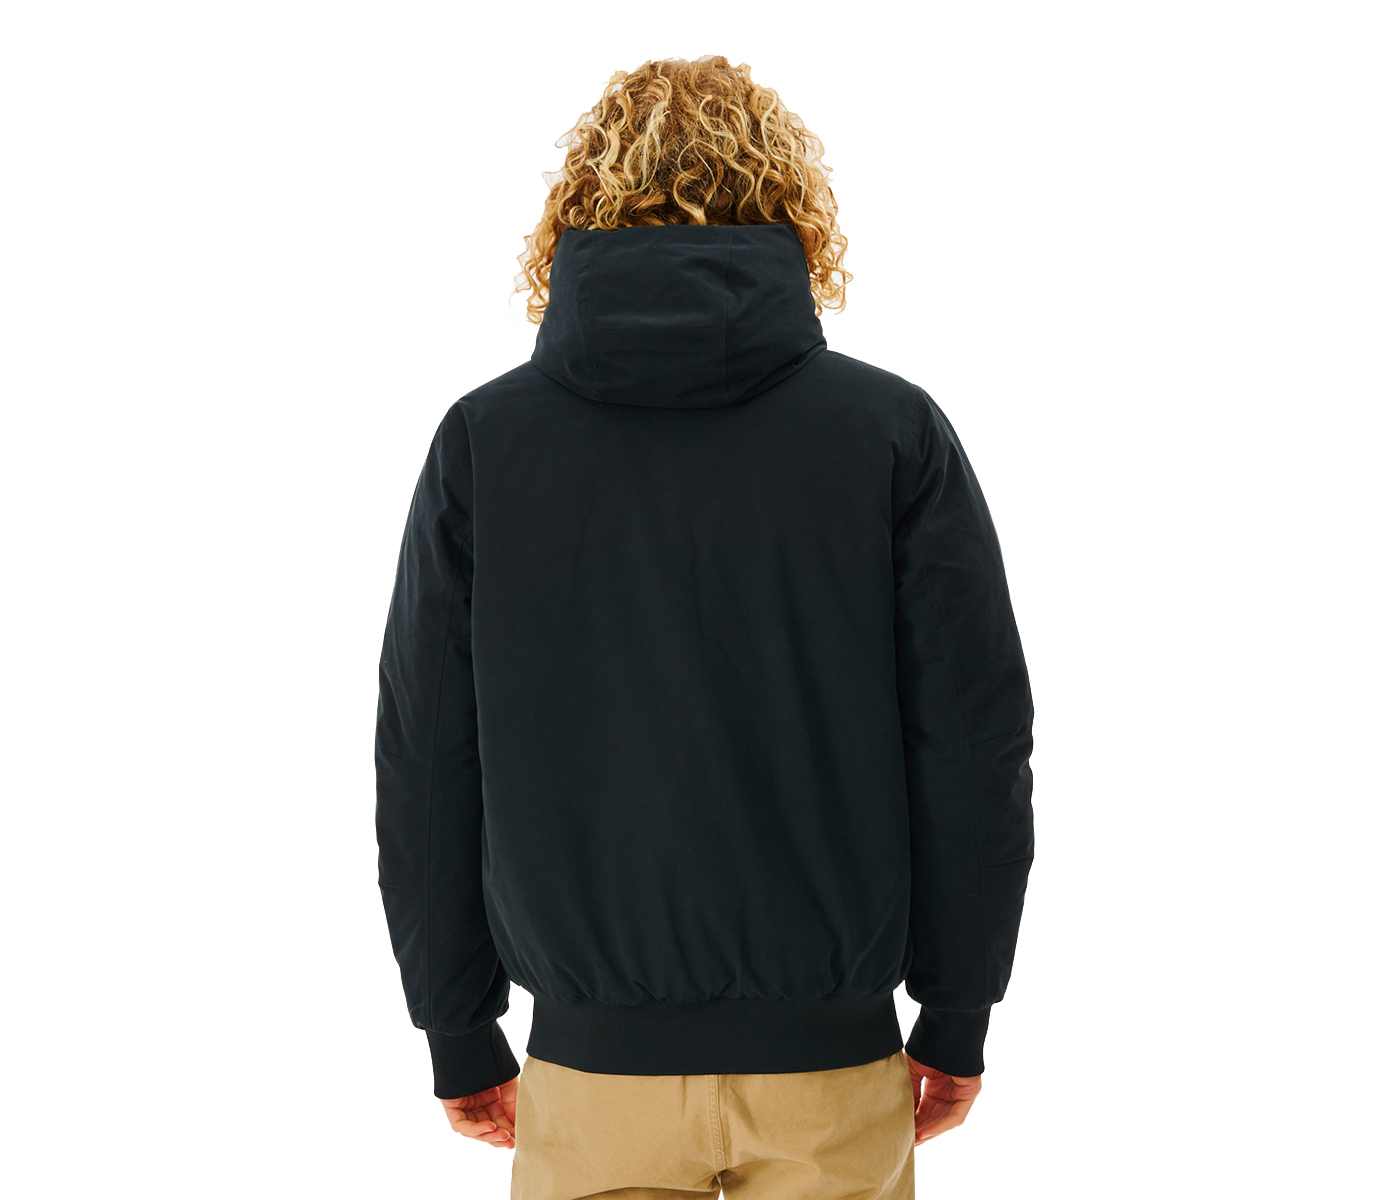 Jacket Rip Curl One Shot